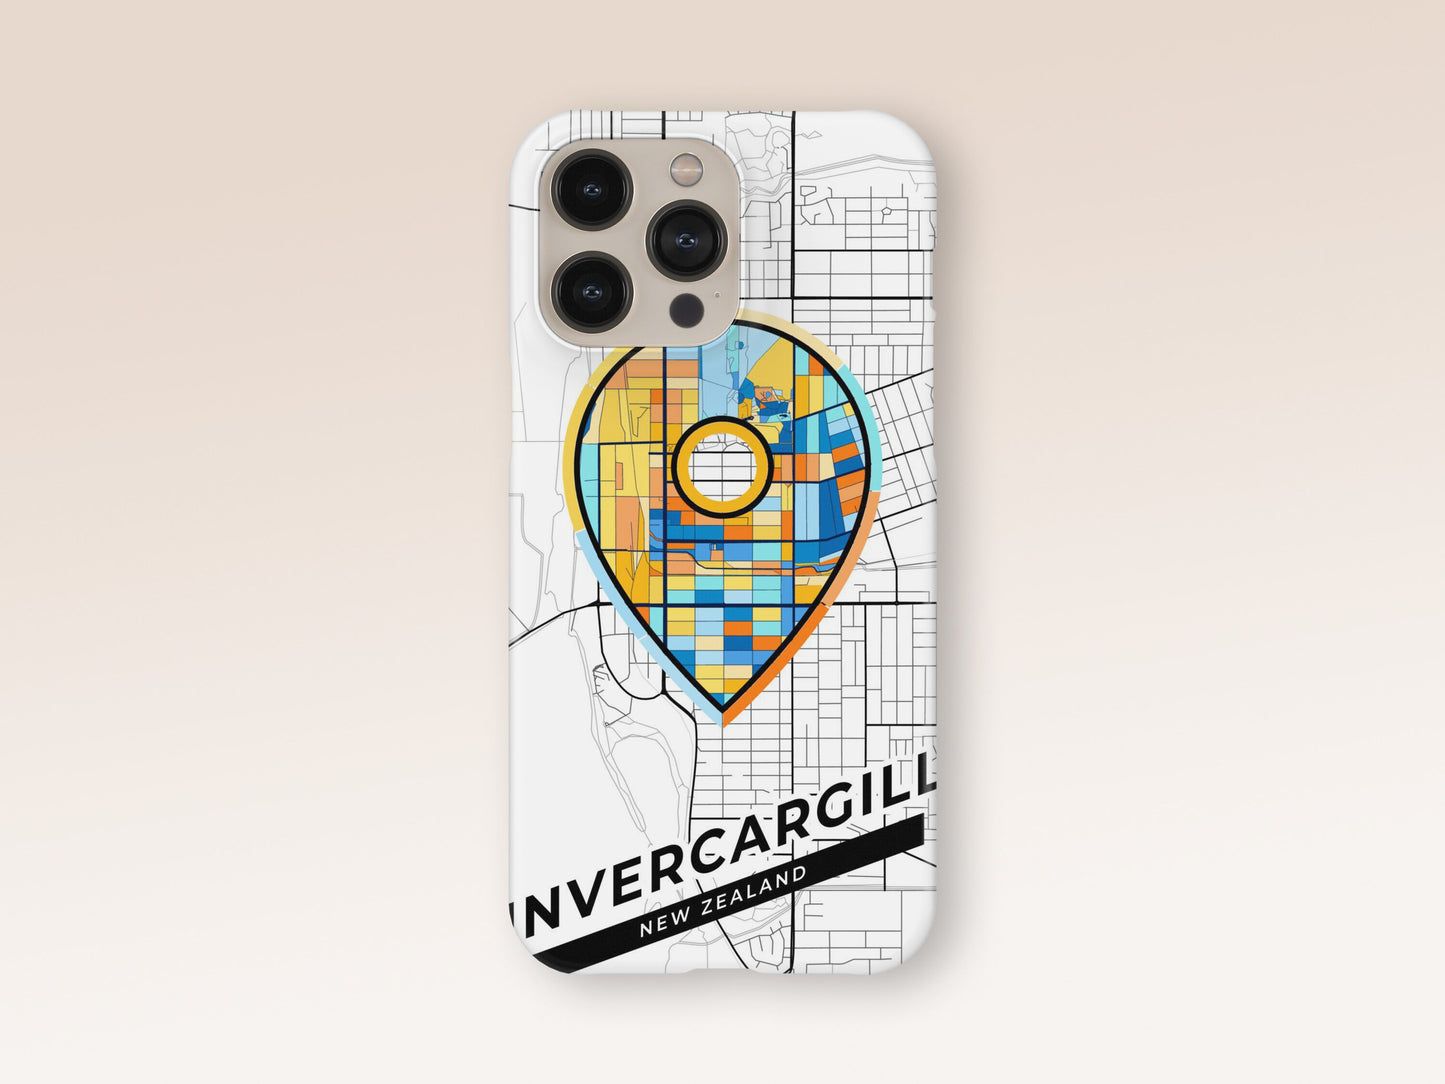 Invercargill New Zealand slim phone case with colorful icon. Birthday, wedding or housewarming gift. Couple match cases. 1